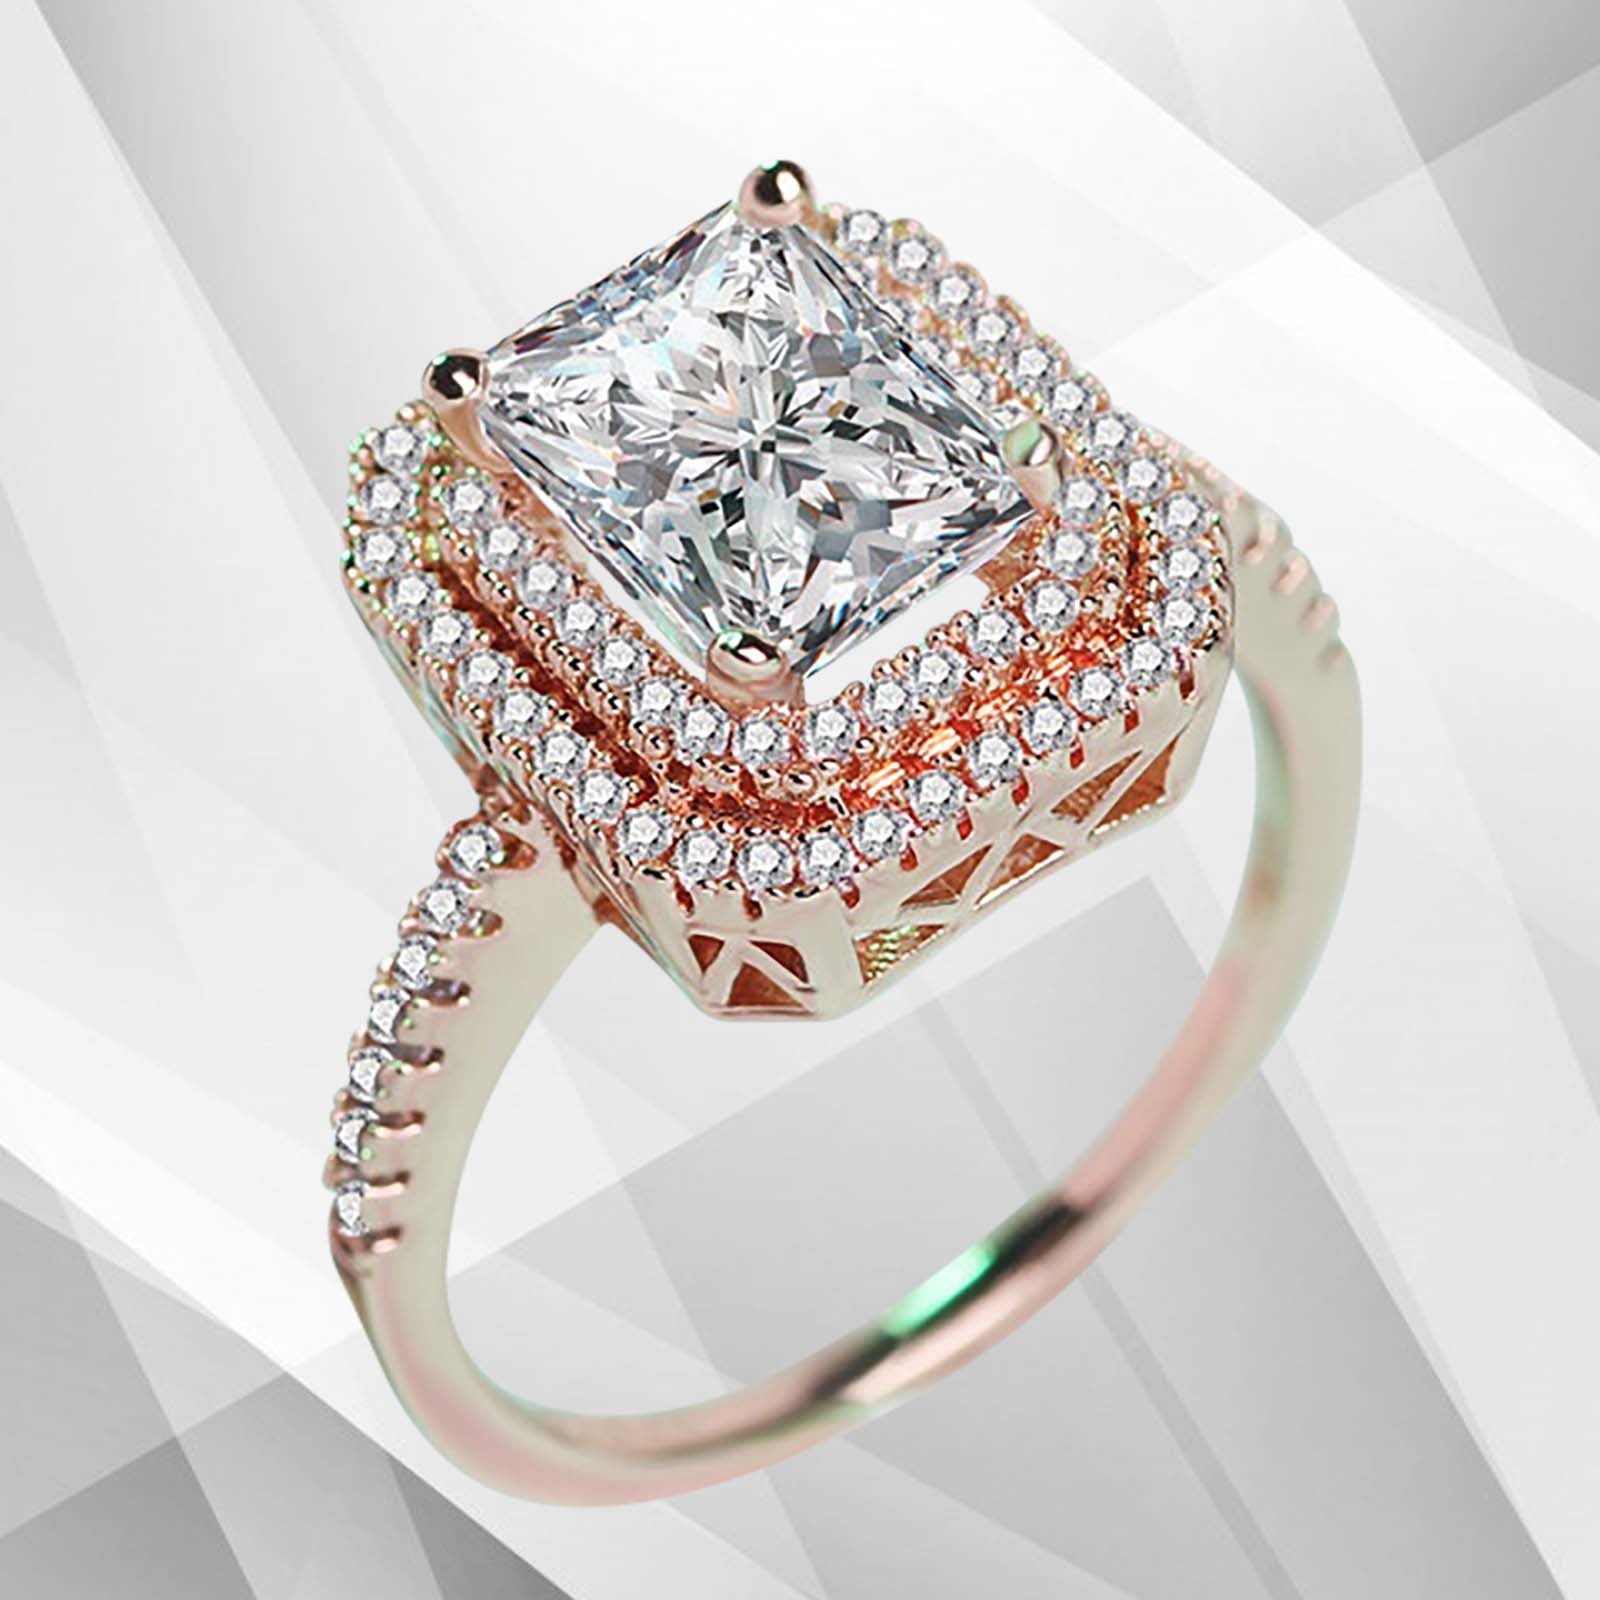 Nature-Inspired Pave Engagement Ring - 3.20Ct CZ Diamond, 18Ct Rose Gold - Hypoallergenic, Free Shipping - Jewelry & Watches - Bijou Her -  -  - 